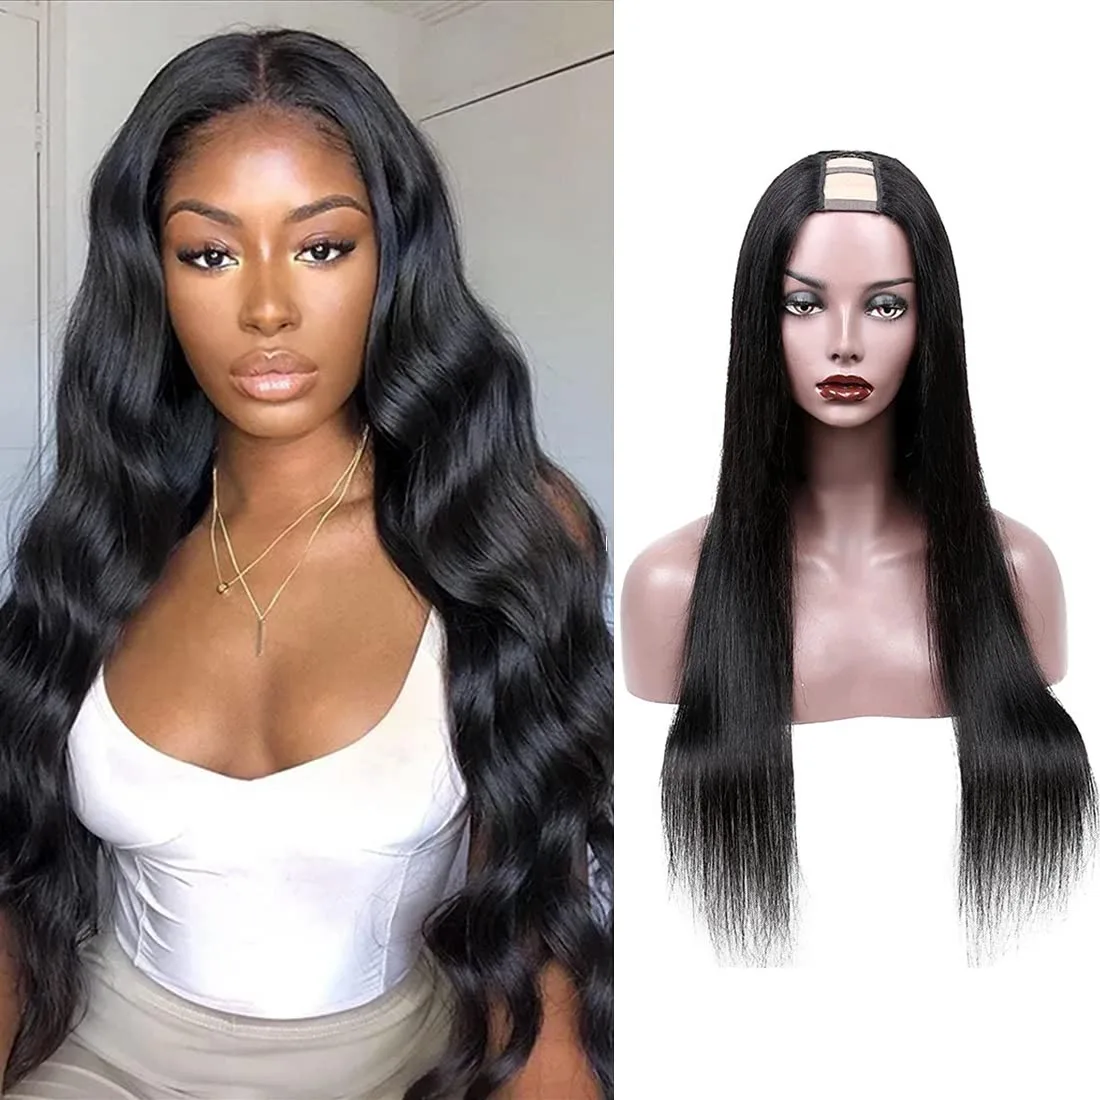 Straight U Part Human Hair Wigs 150% Density Natural Black Brazilian Remy Middle Part Machine Made No Lace Front Wig For Women